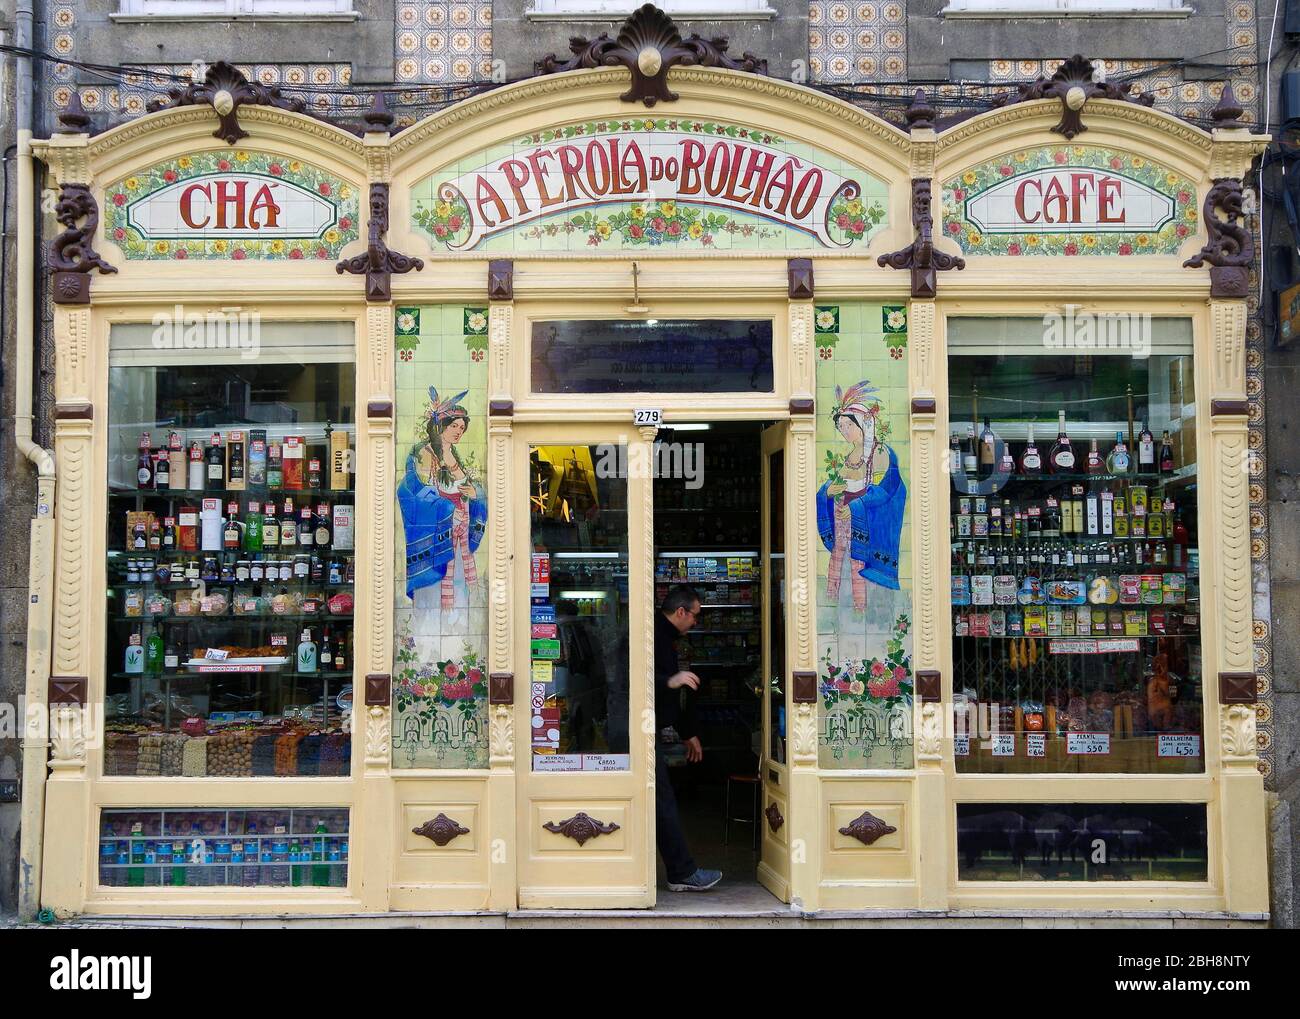 A Perola do Bolhao, The Pearl of Bolhao, a delicatessen and grocers specialising in Portuguese produce, in a beautiful Art Nouveau shop of 1917. Stock Photo